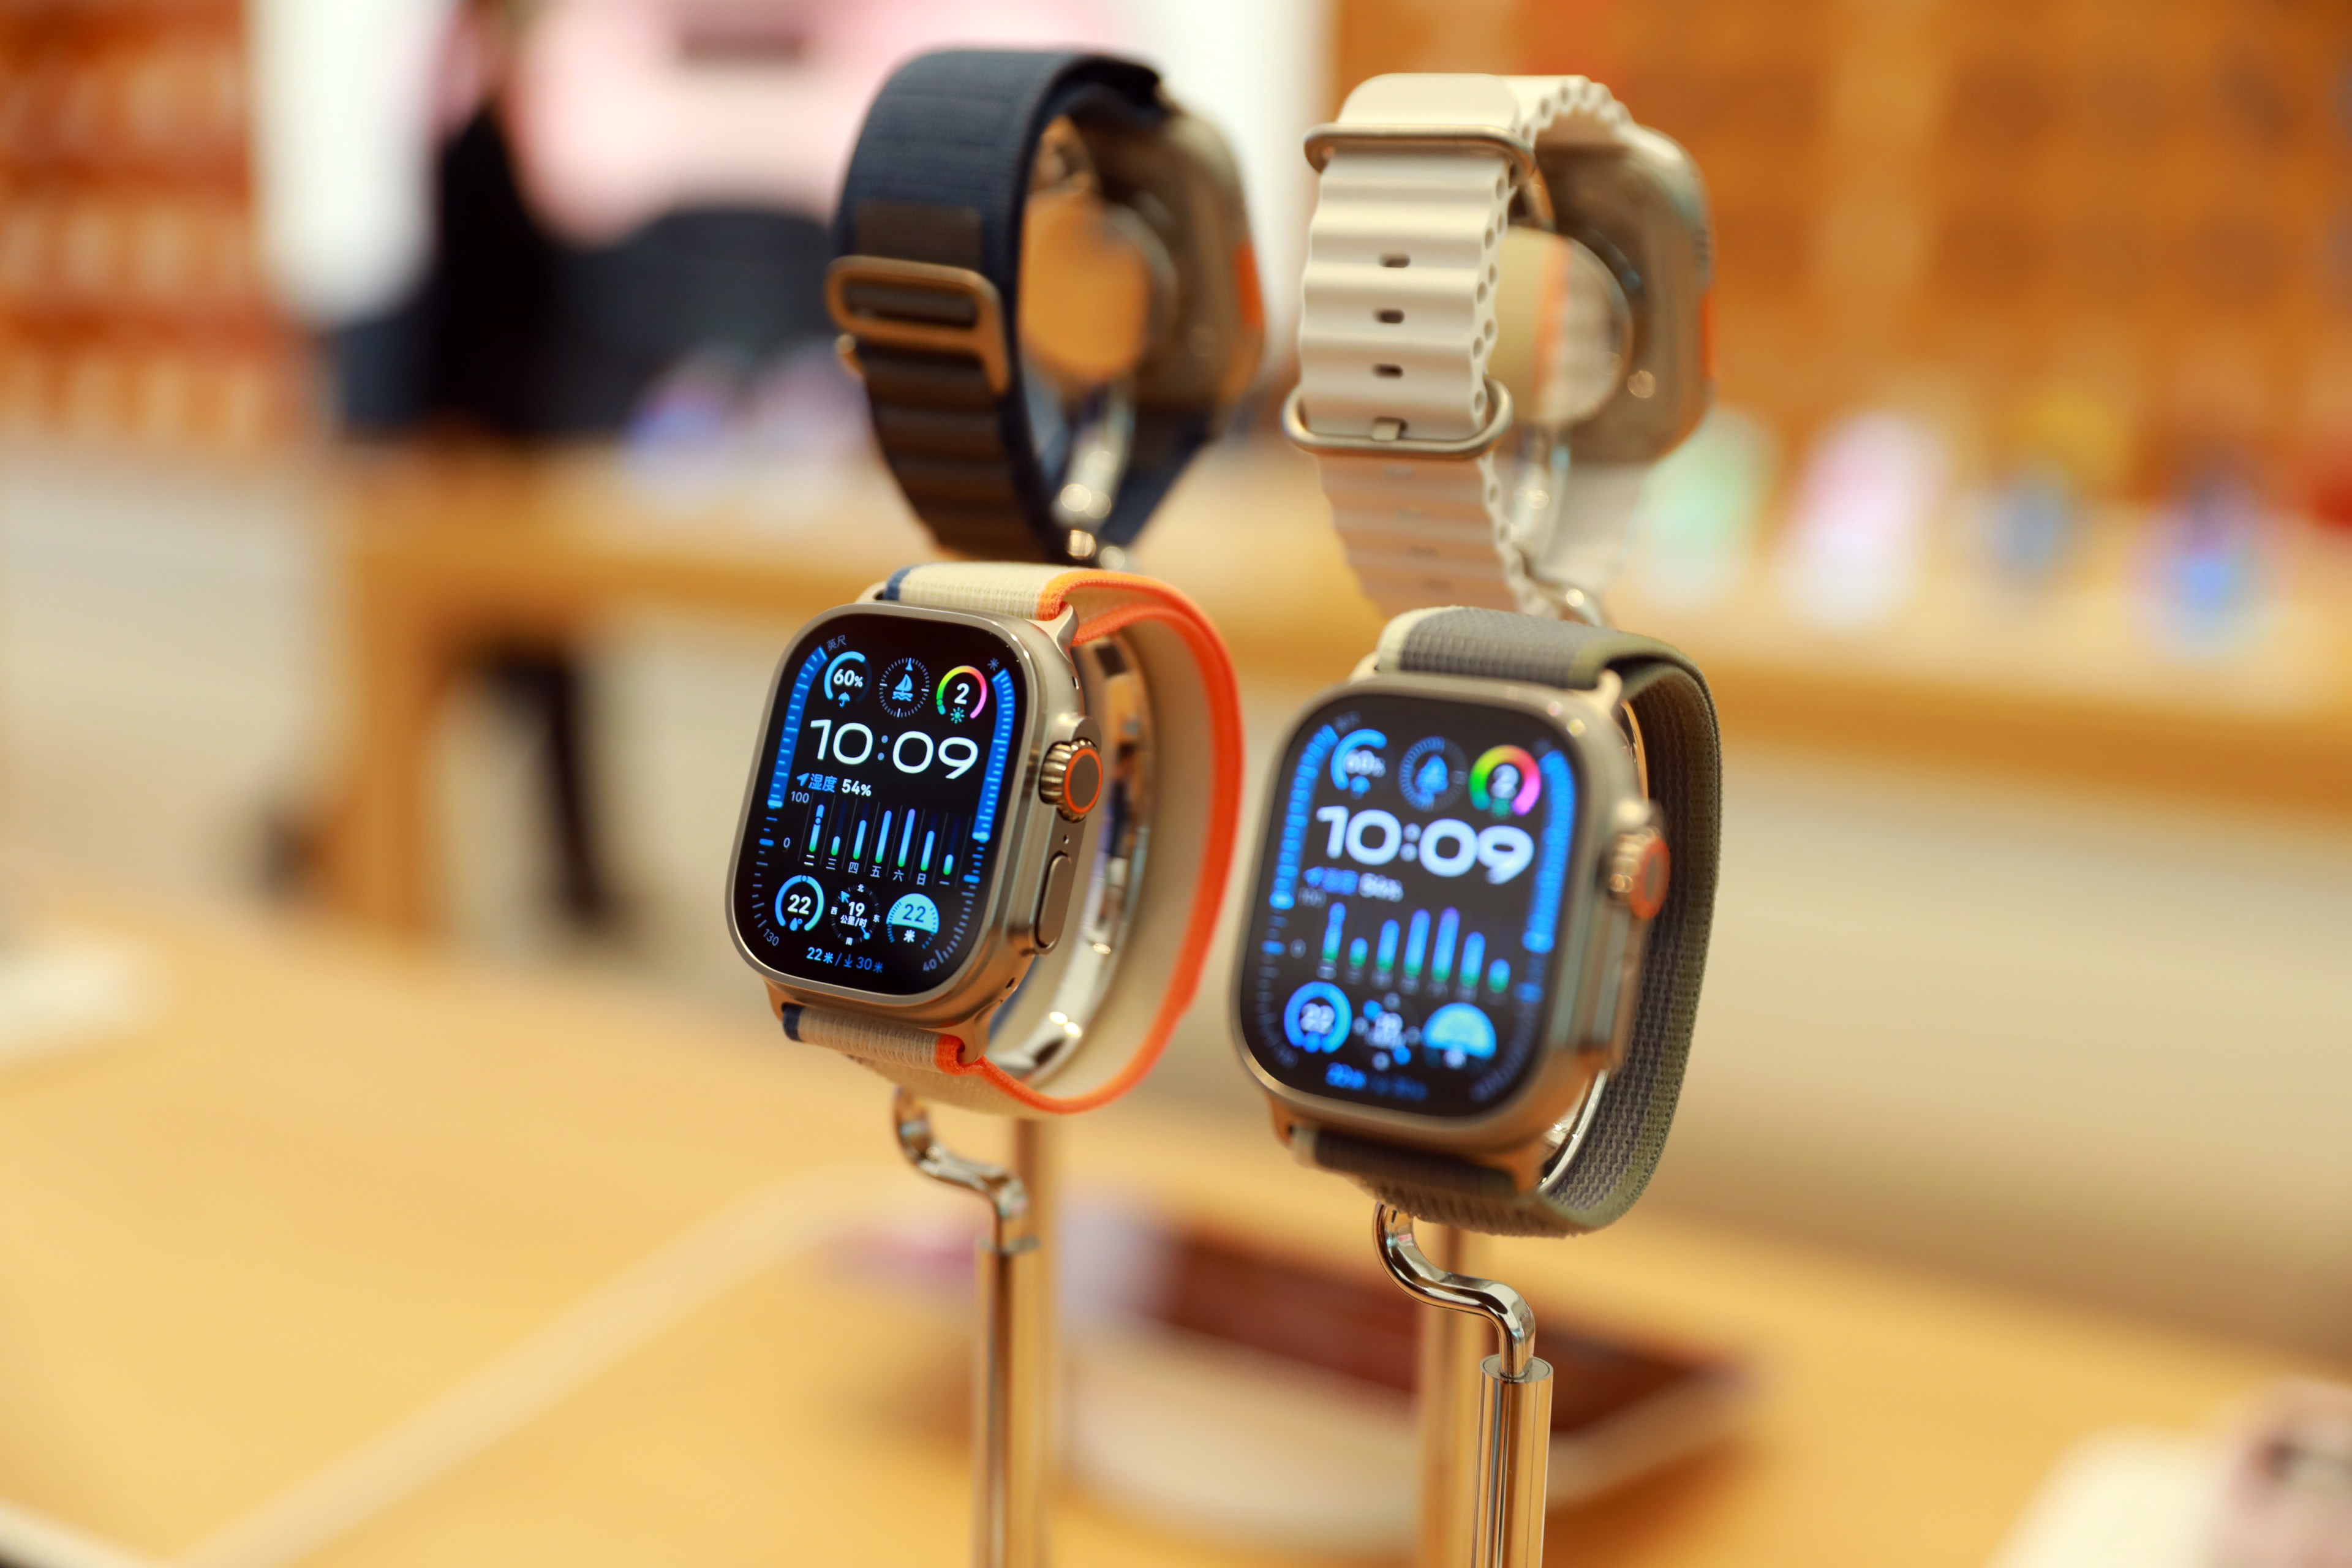 Four Apple watches—two with their faces visible—are on display